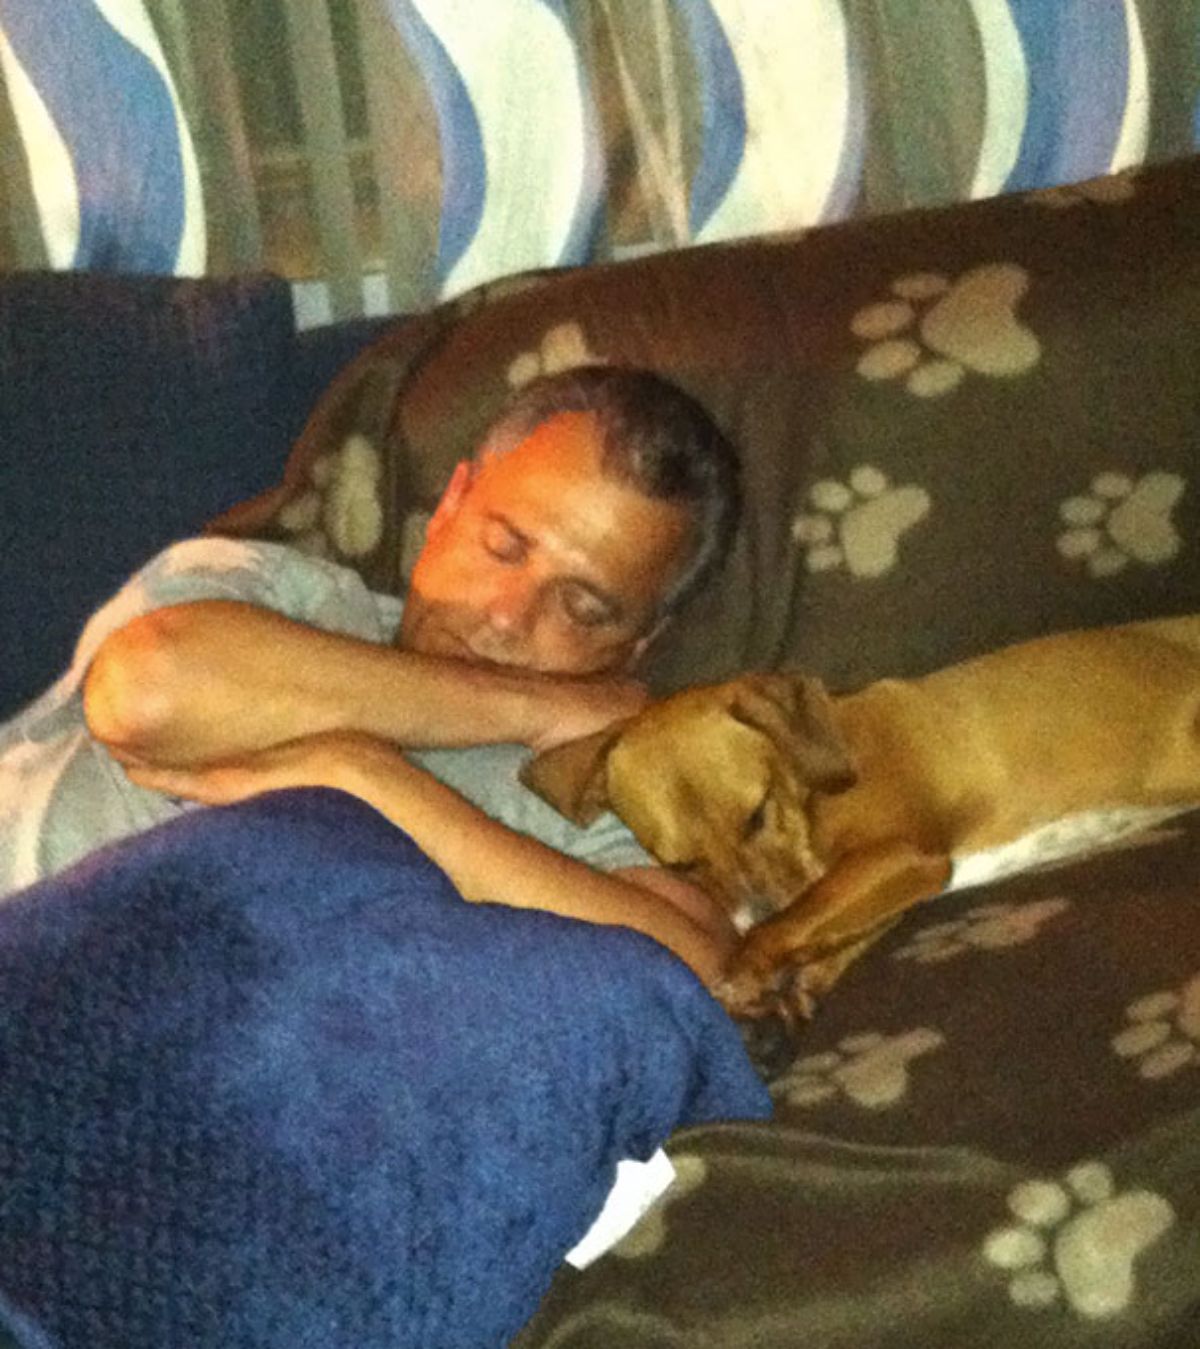 brown and white dog sleeping on a brown sofa cuddling with a sleeping man